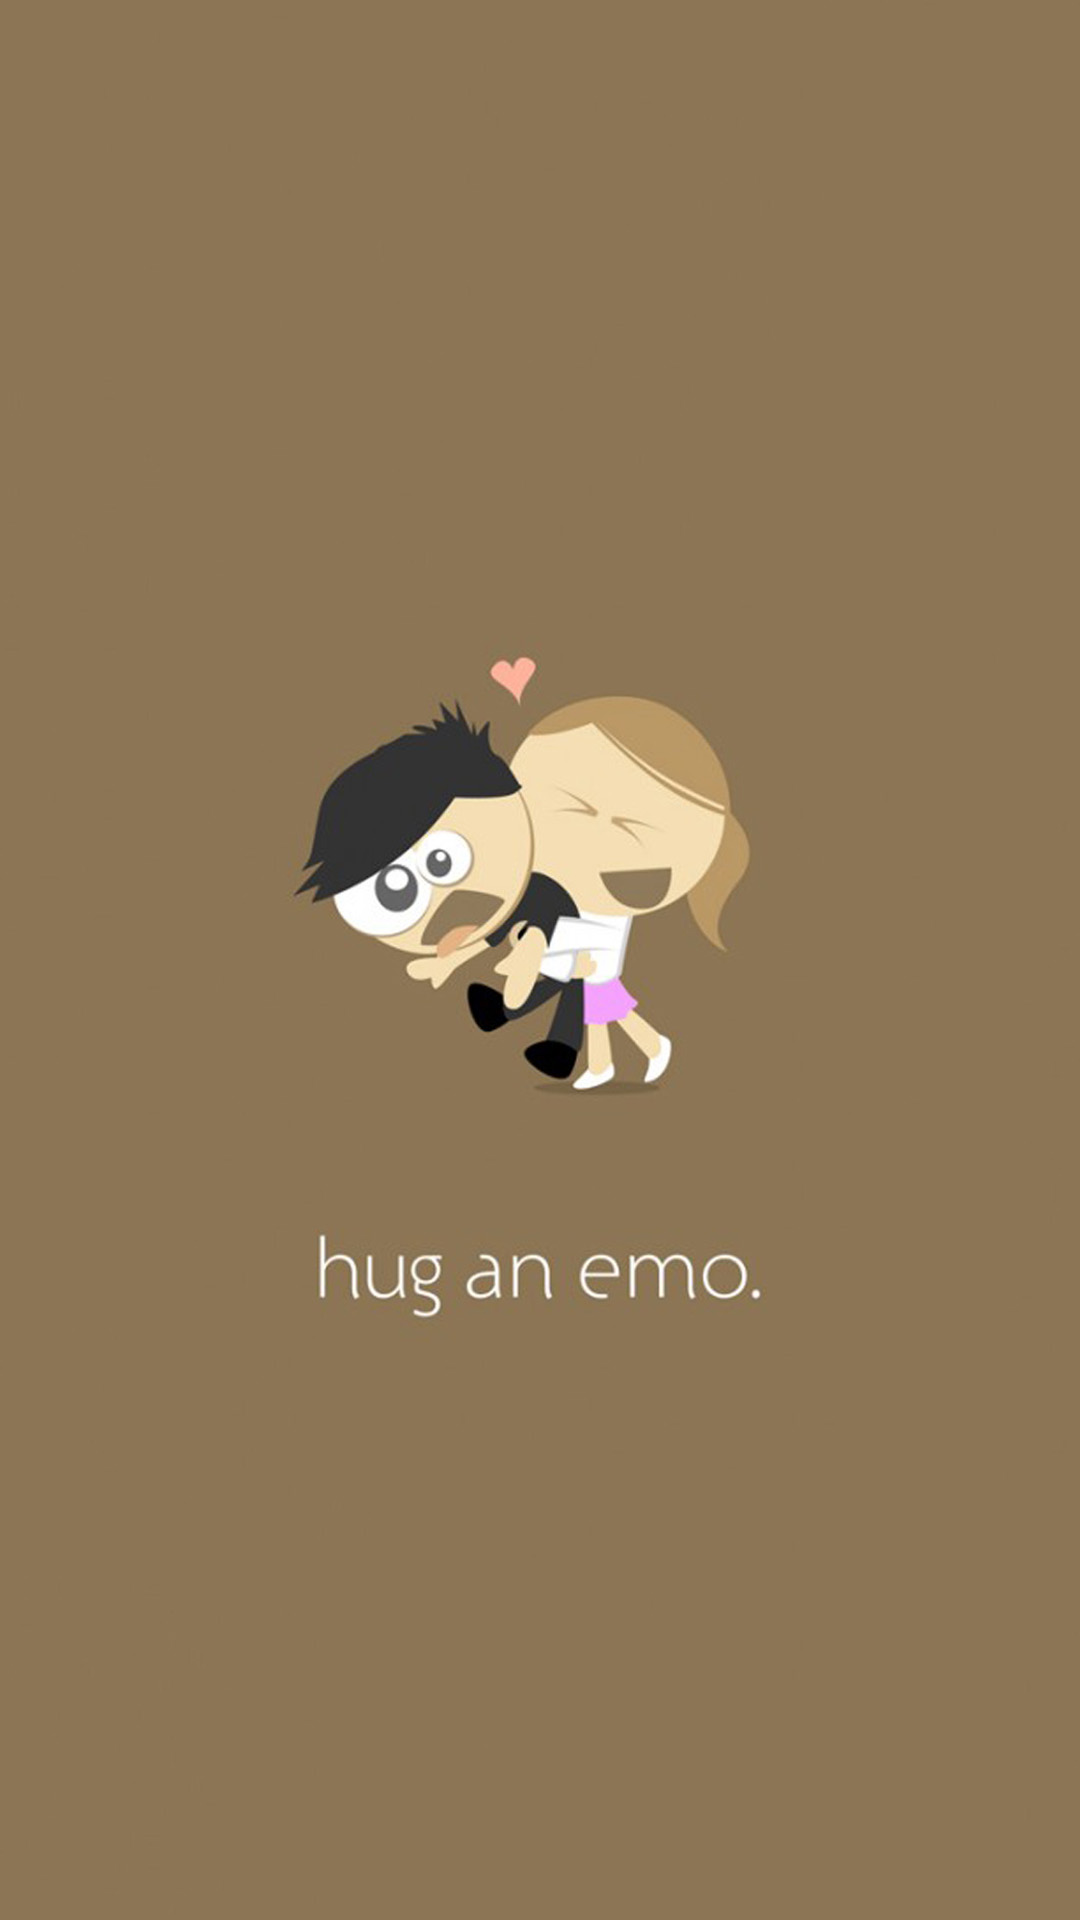 Emo Wallpaper For Iphone Picserio - Funny Iphone Wallpapers For Girls -  1080x1920 Wallpaper 